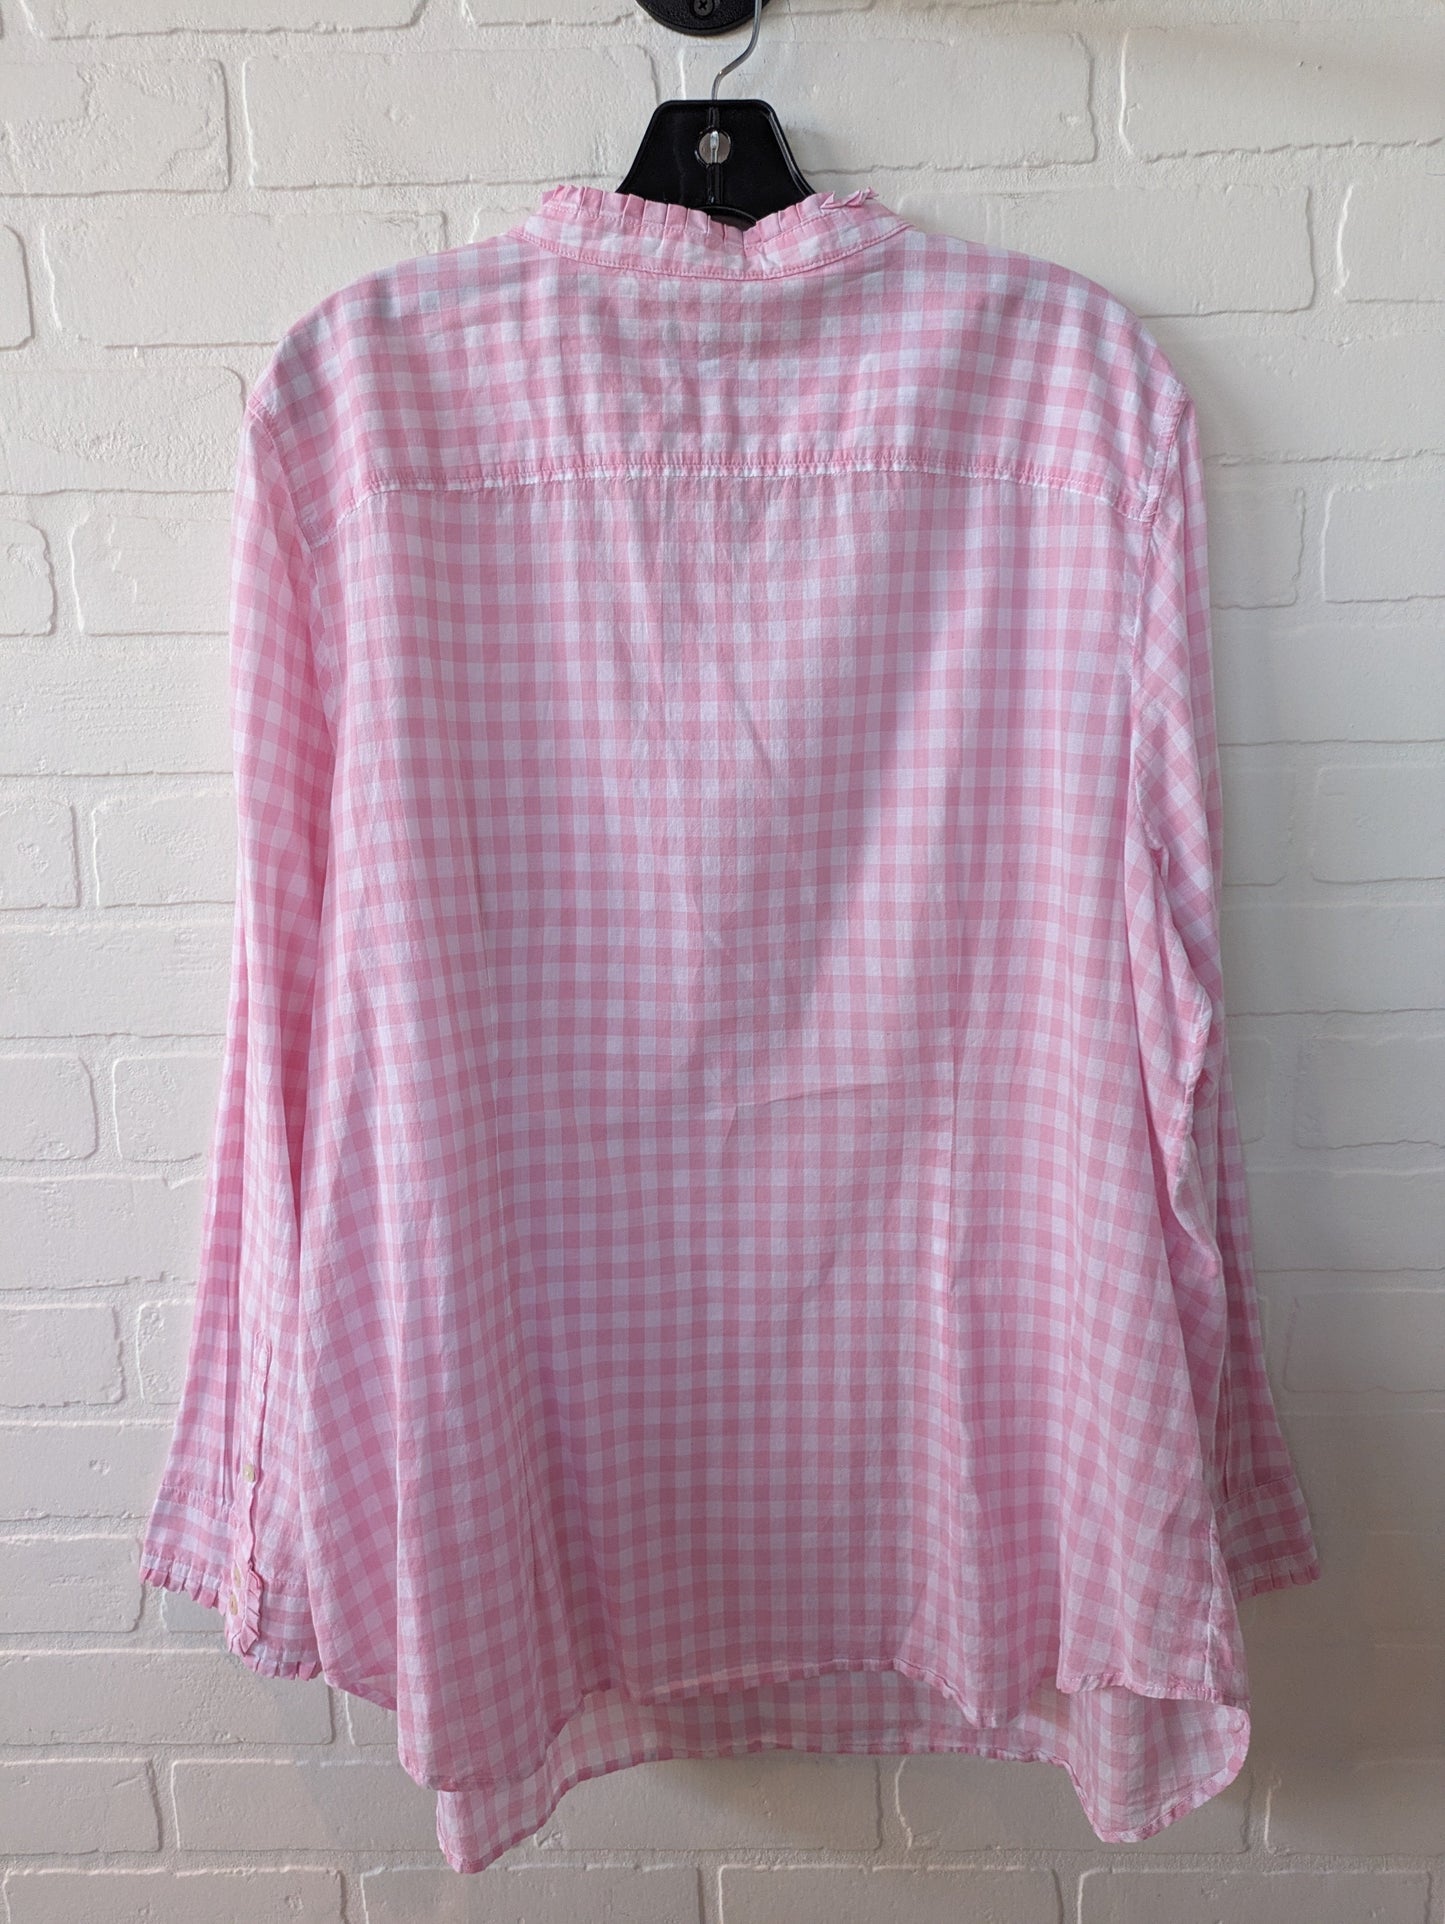 Blouse Long Sleeve By Talbots  Size: 2x